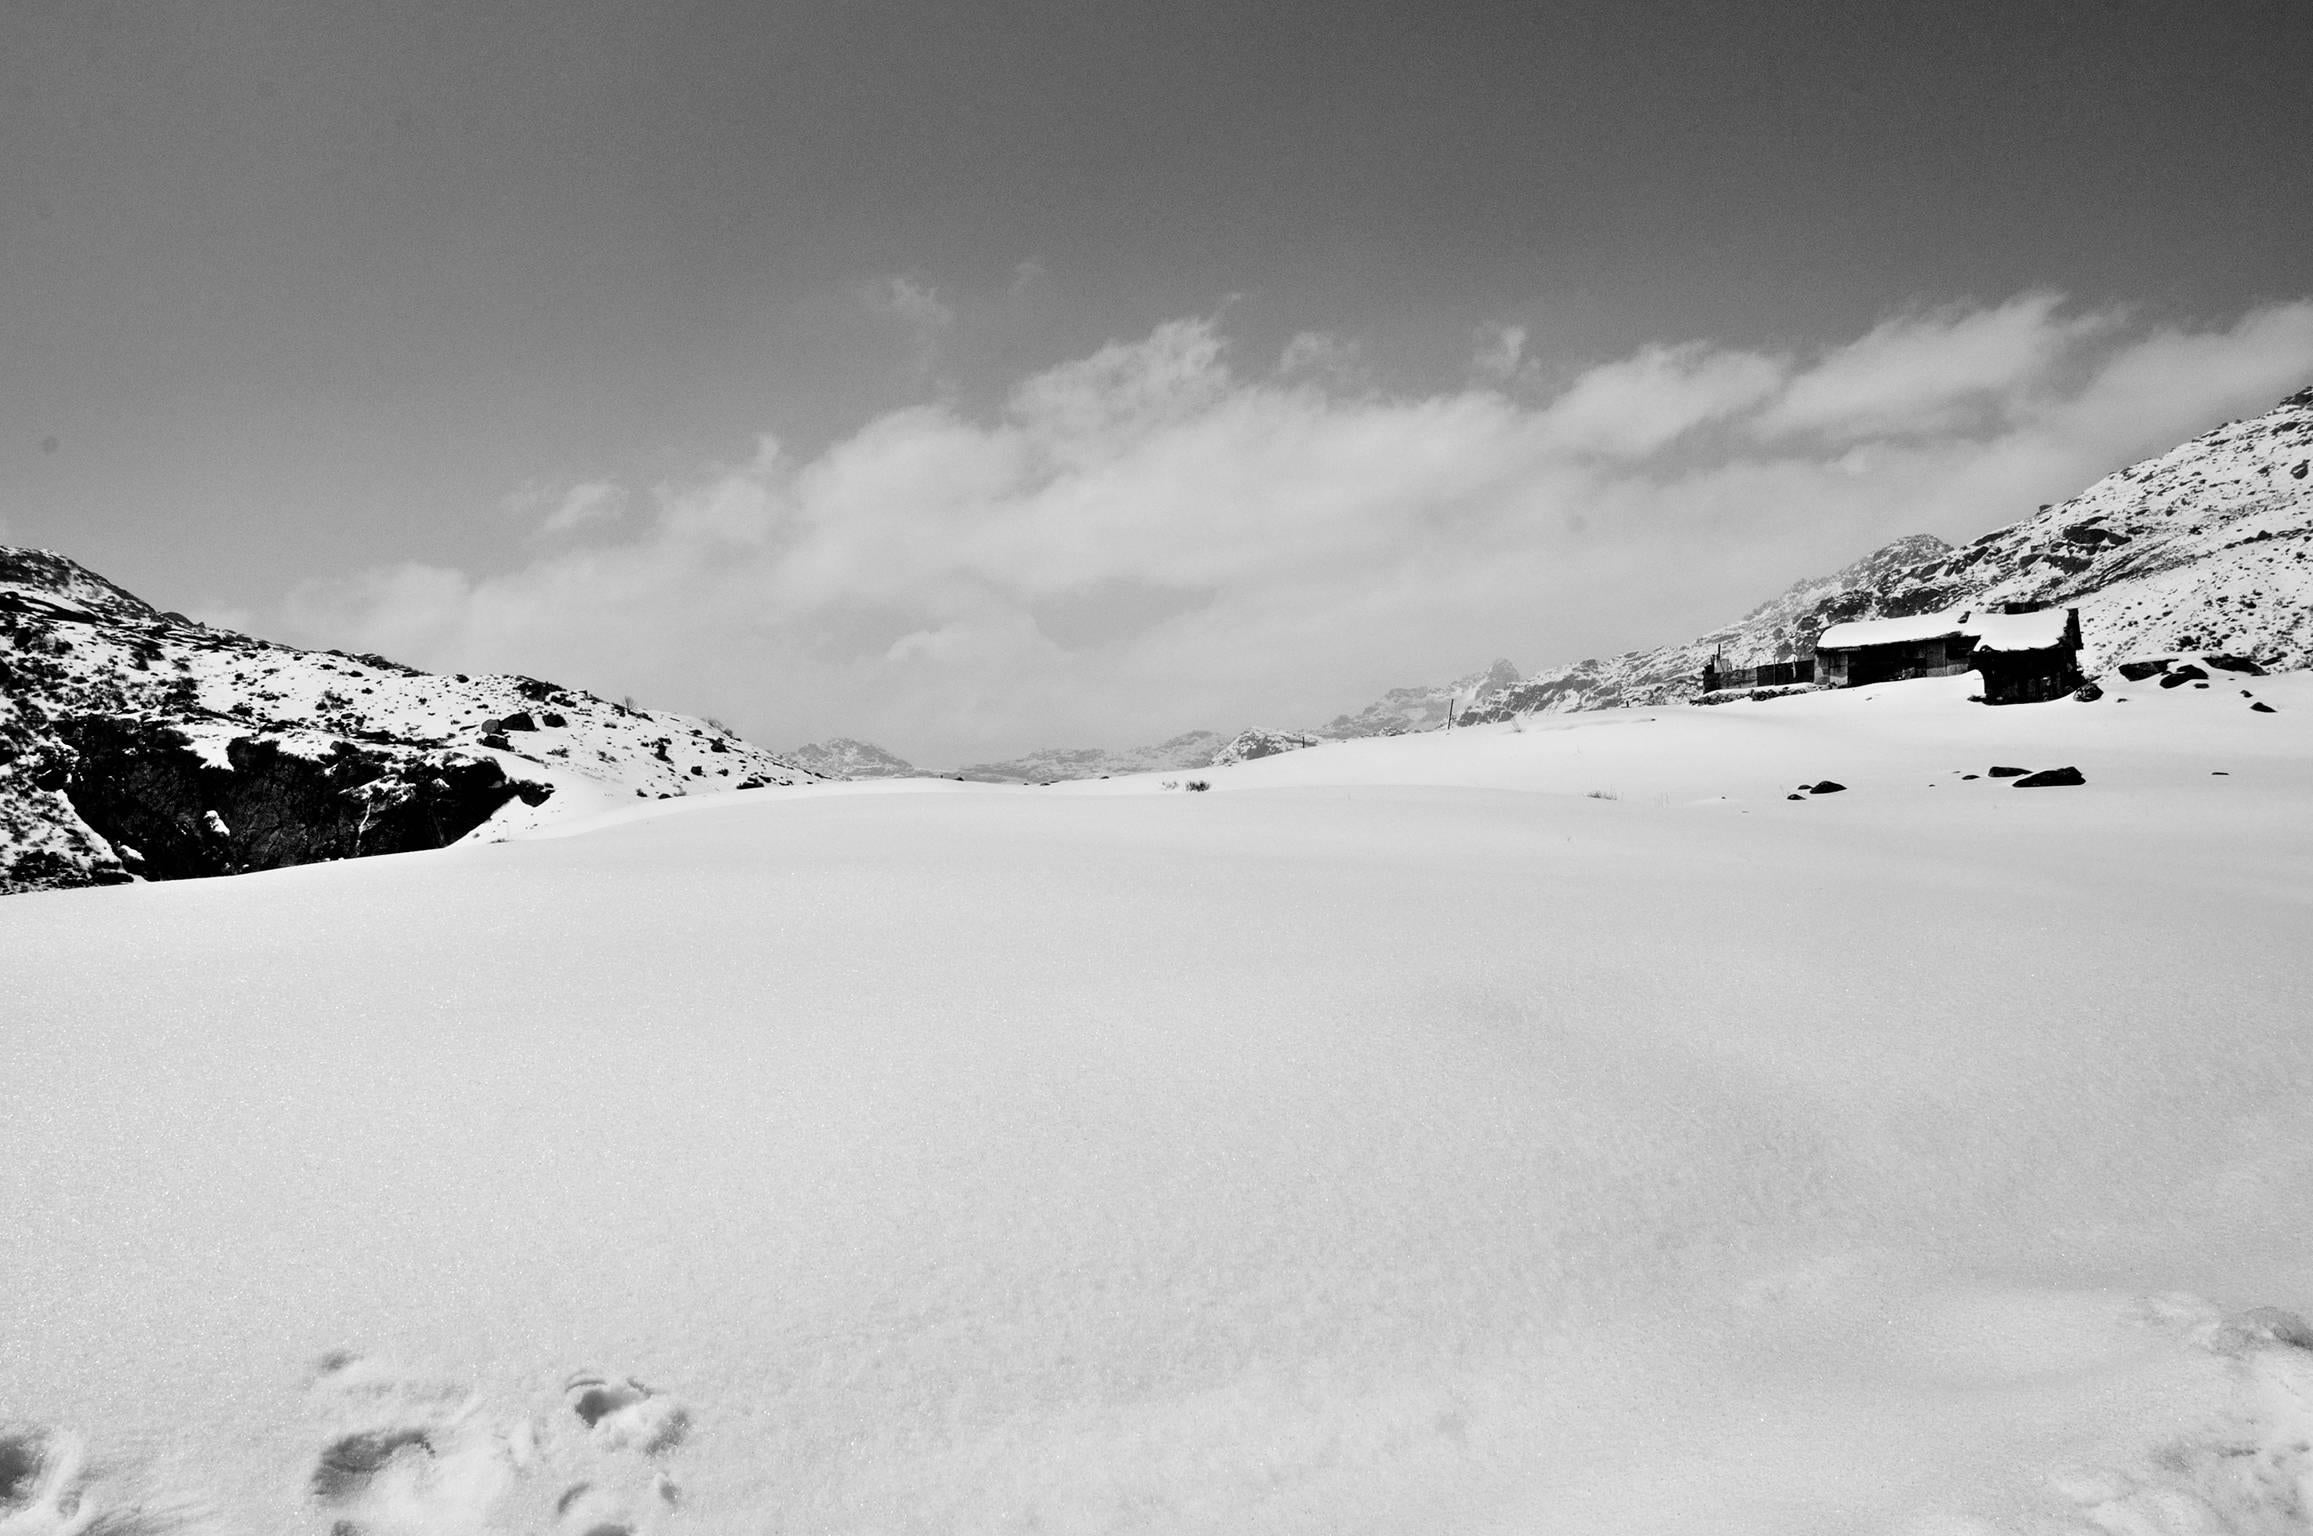 Snowy Hills Scenery, Black & White Photography by Indian Artist 